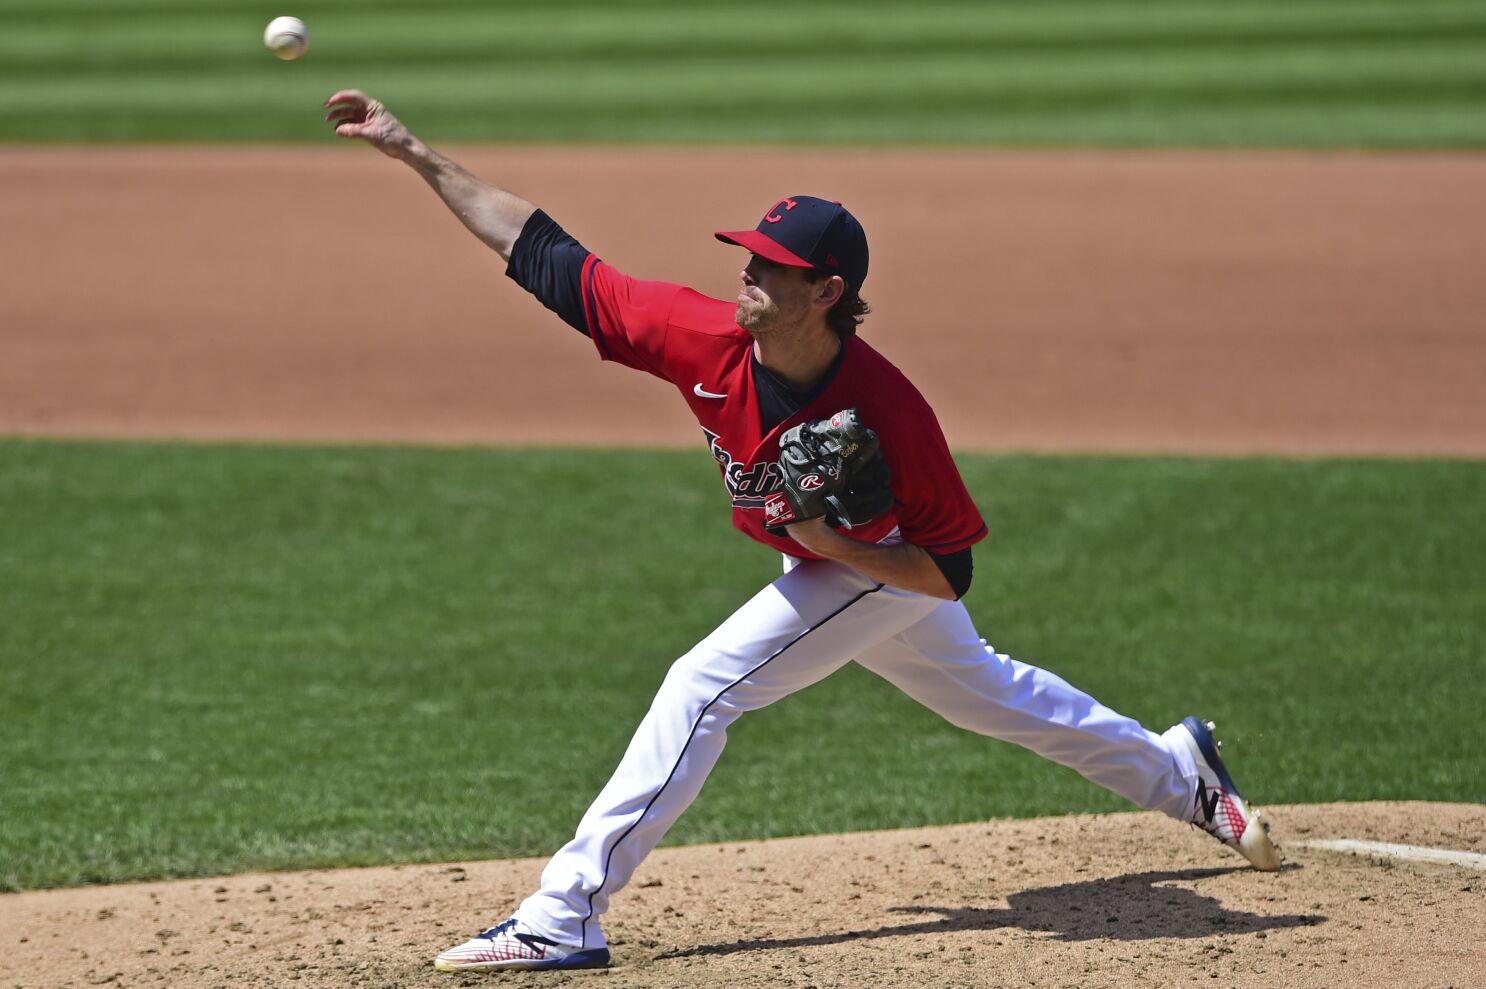 Tribe ace Shane Bieber breaks yet another record